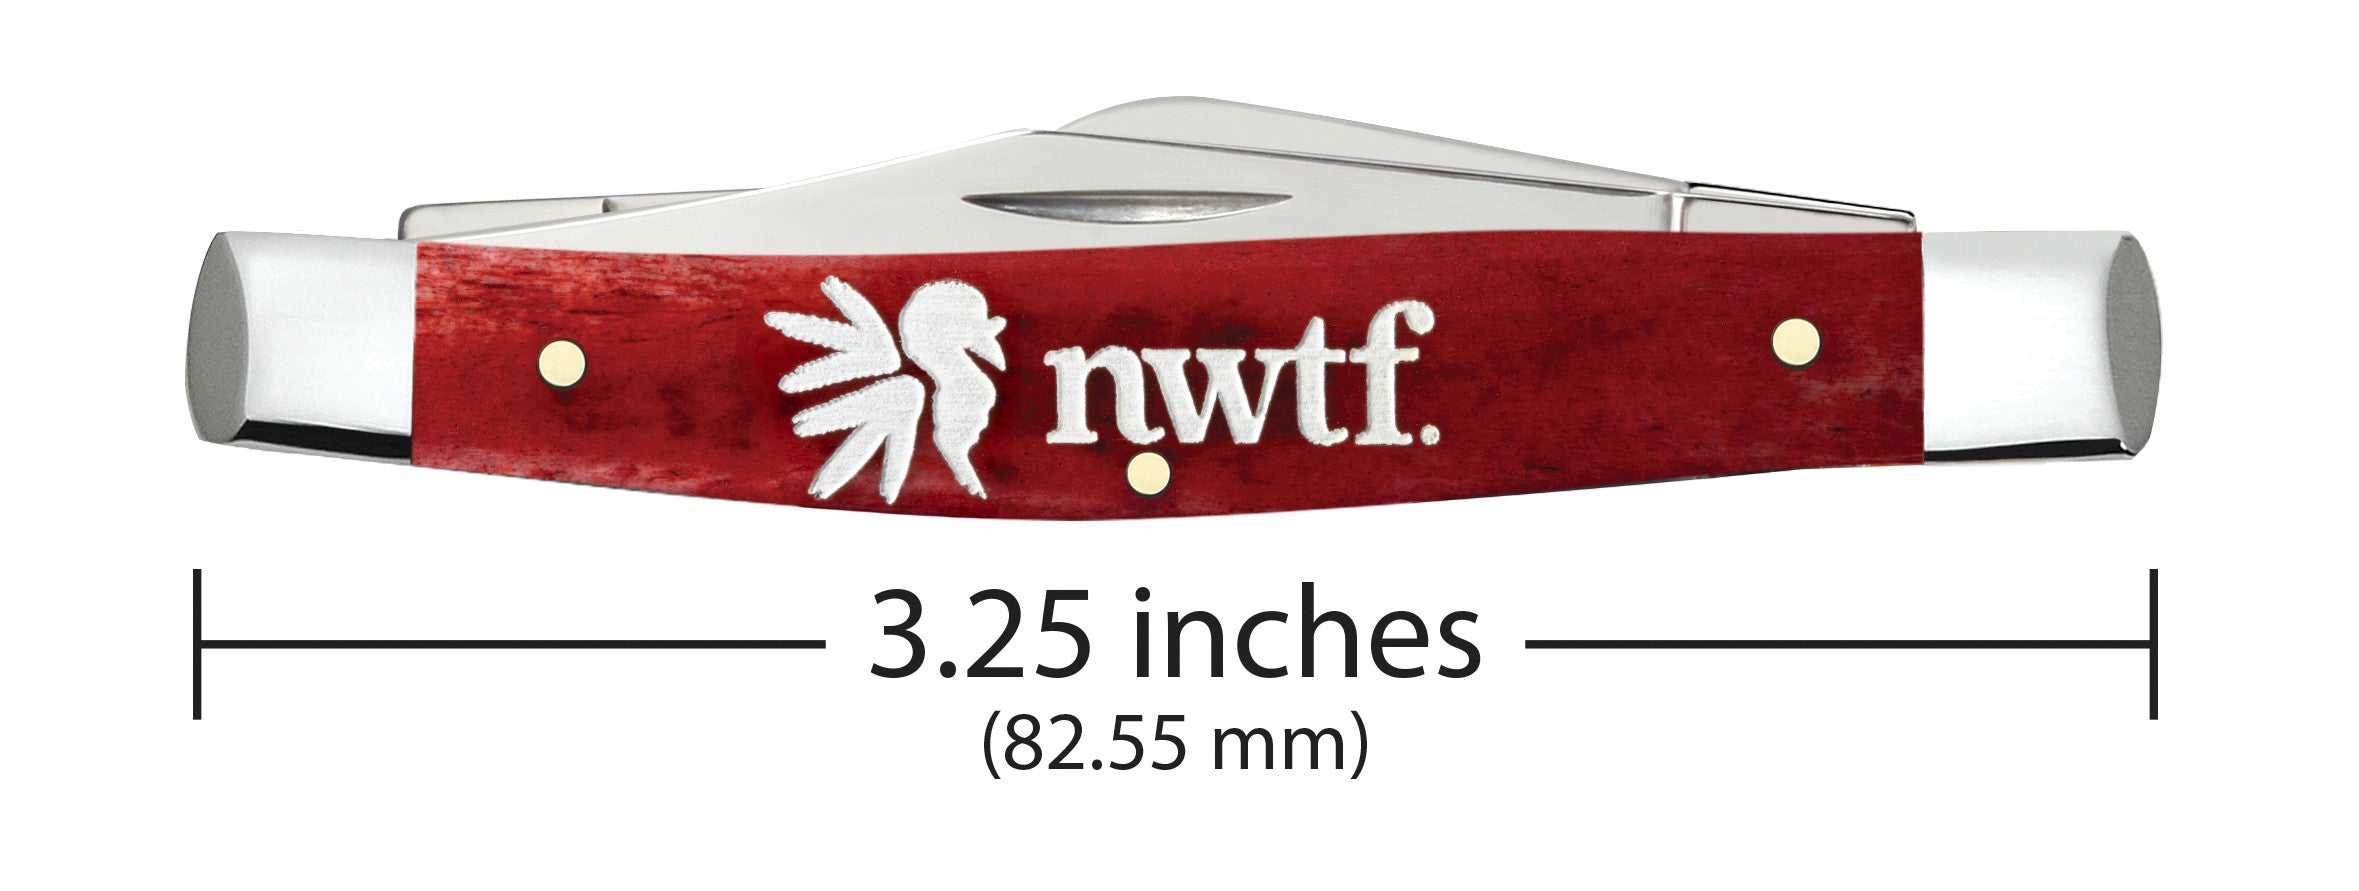 NWTF Embellished Smooth Old Red Bone Medium Stockman Knife Dimensions